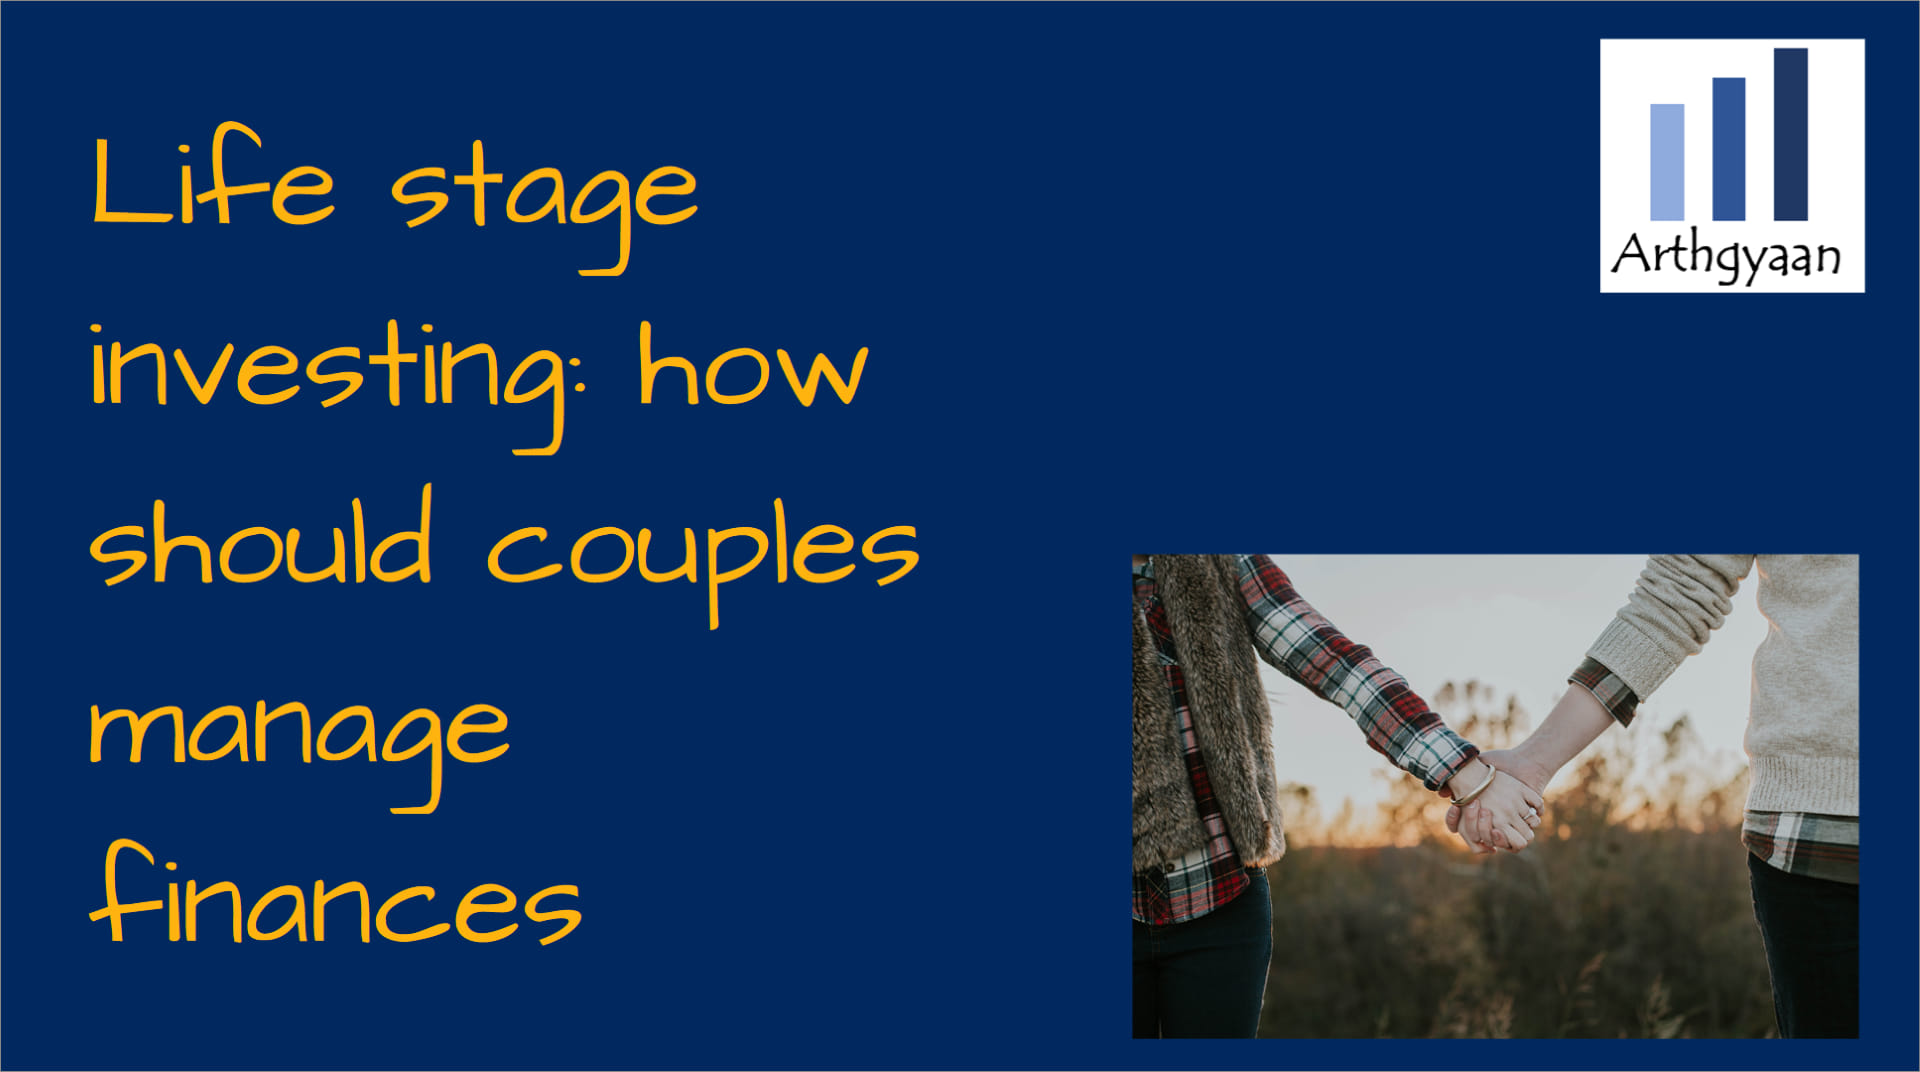 Life stage investing: how should couples manage finances